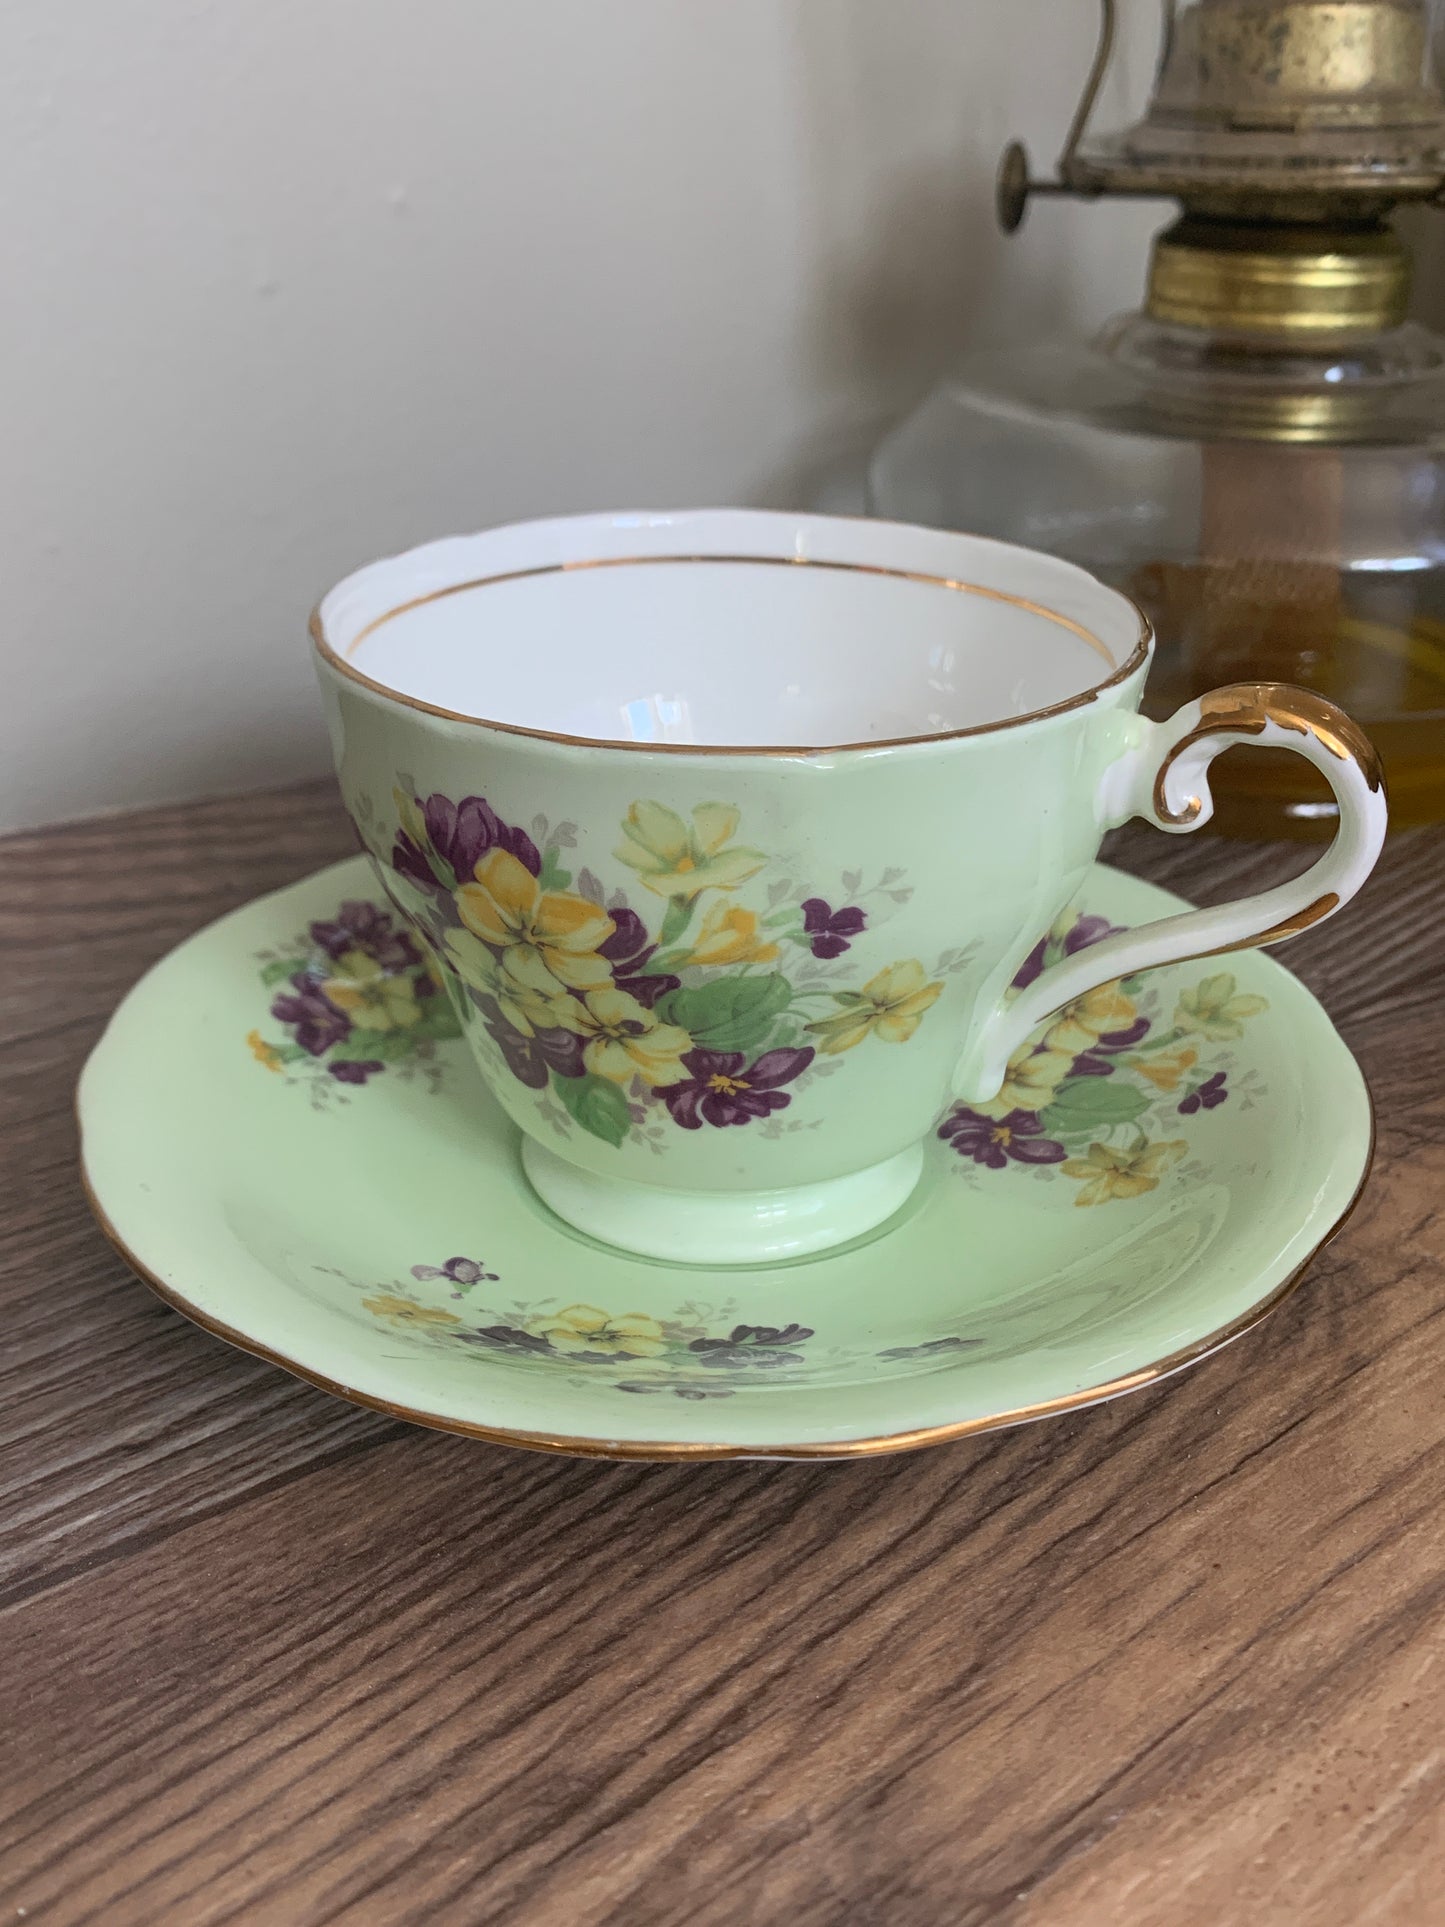 Green Vintage Teacup with Purple and Yellow Flowers Aynsley Vintage Tea Cup Mothers Day Gifts